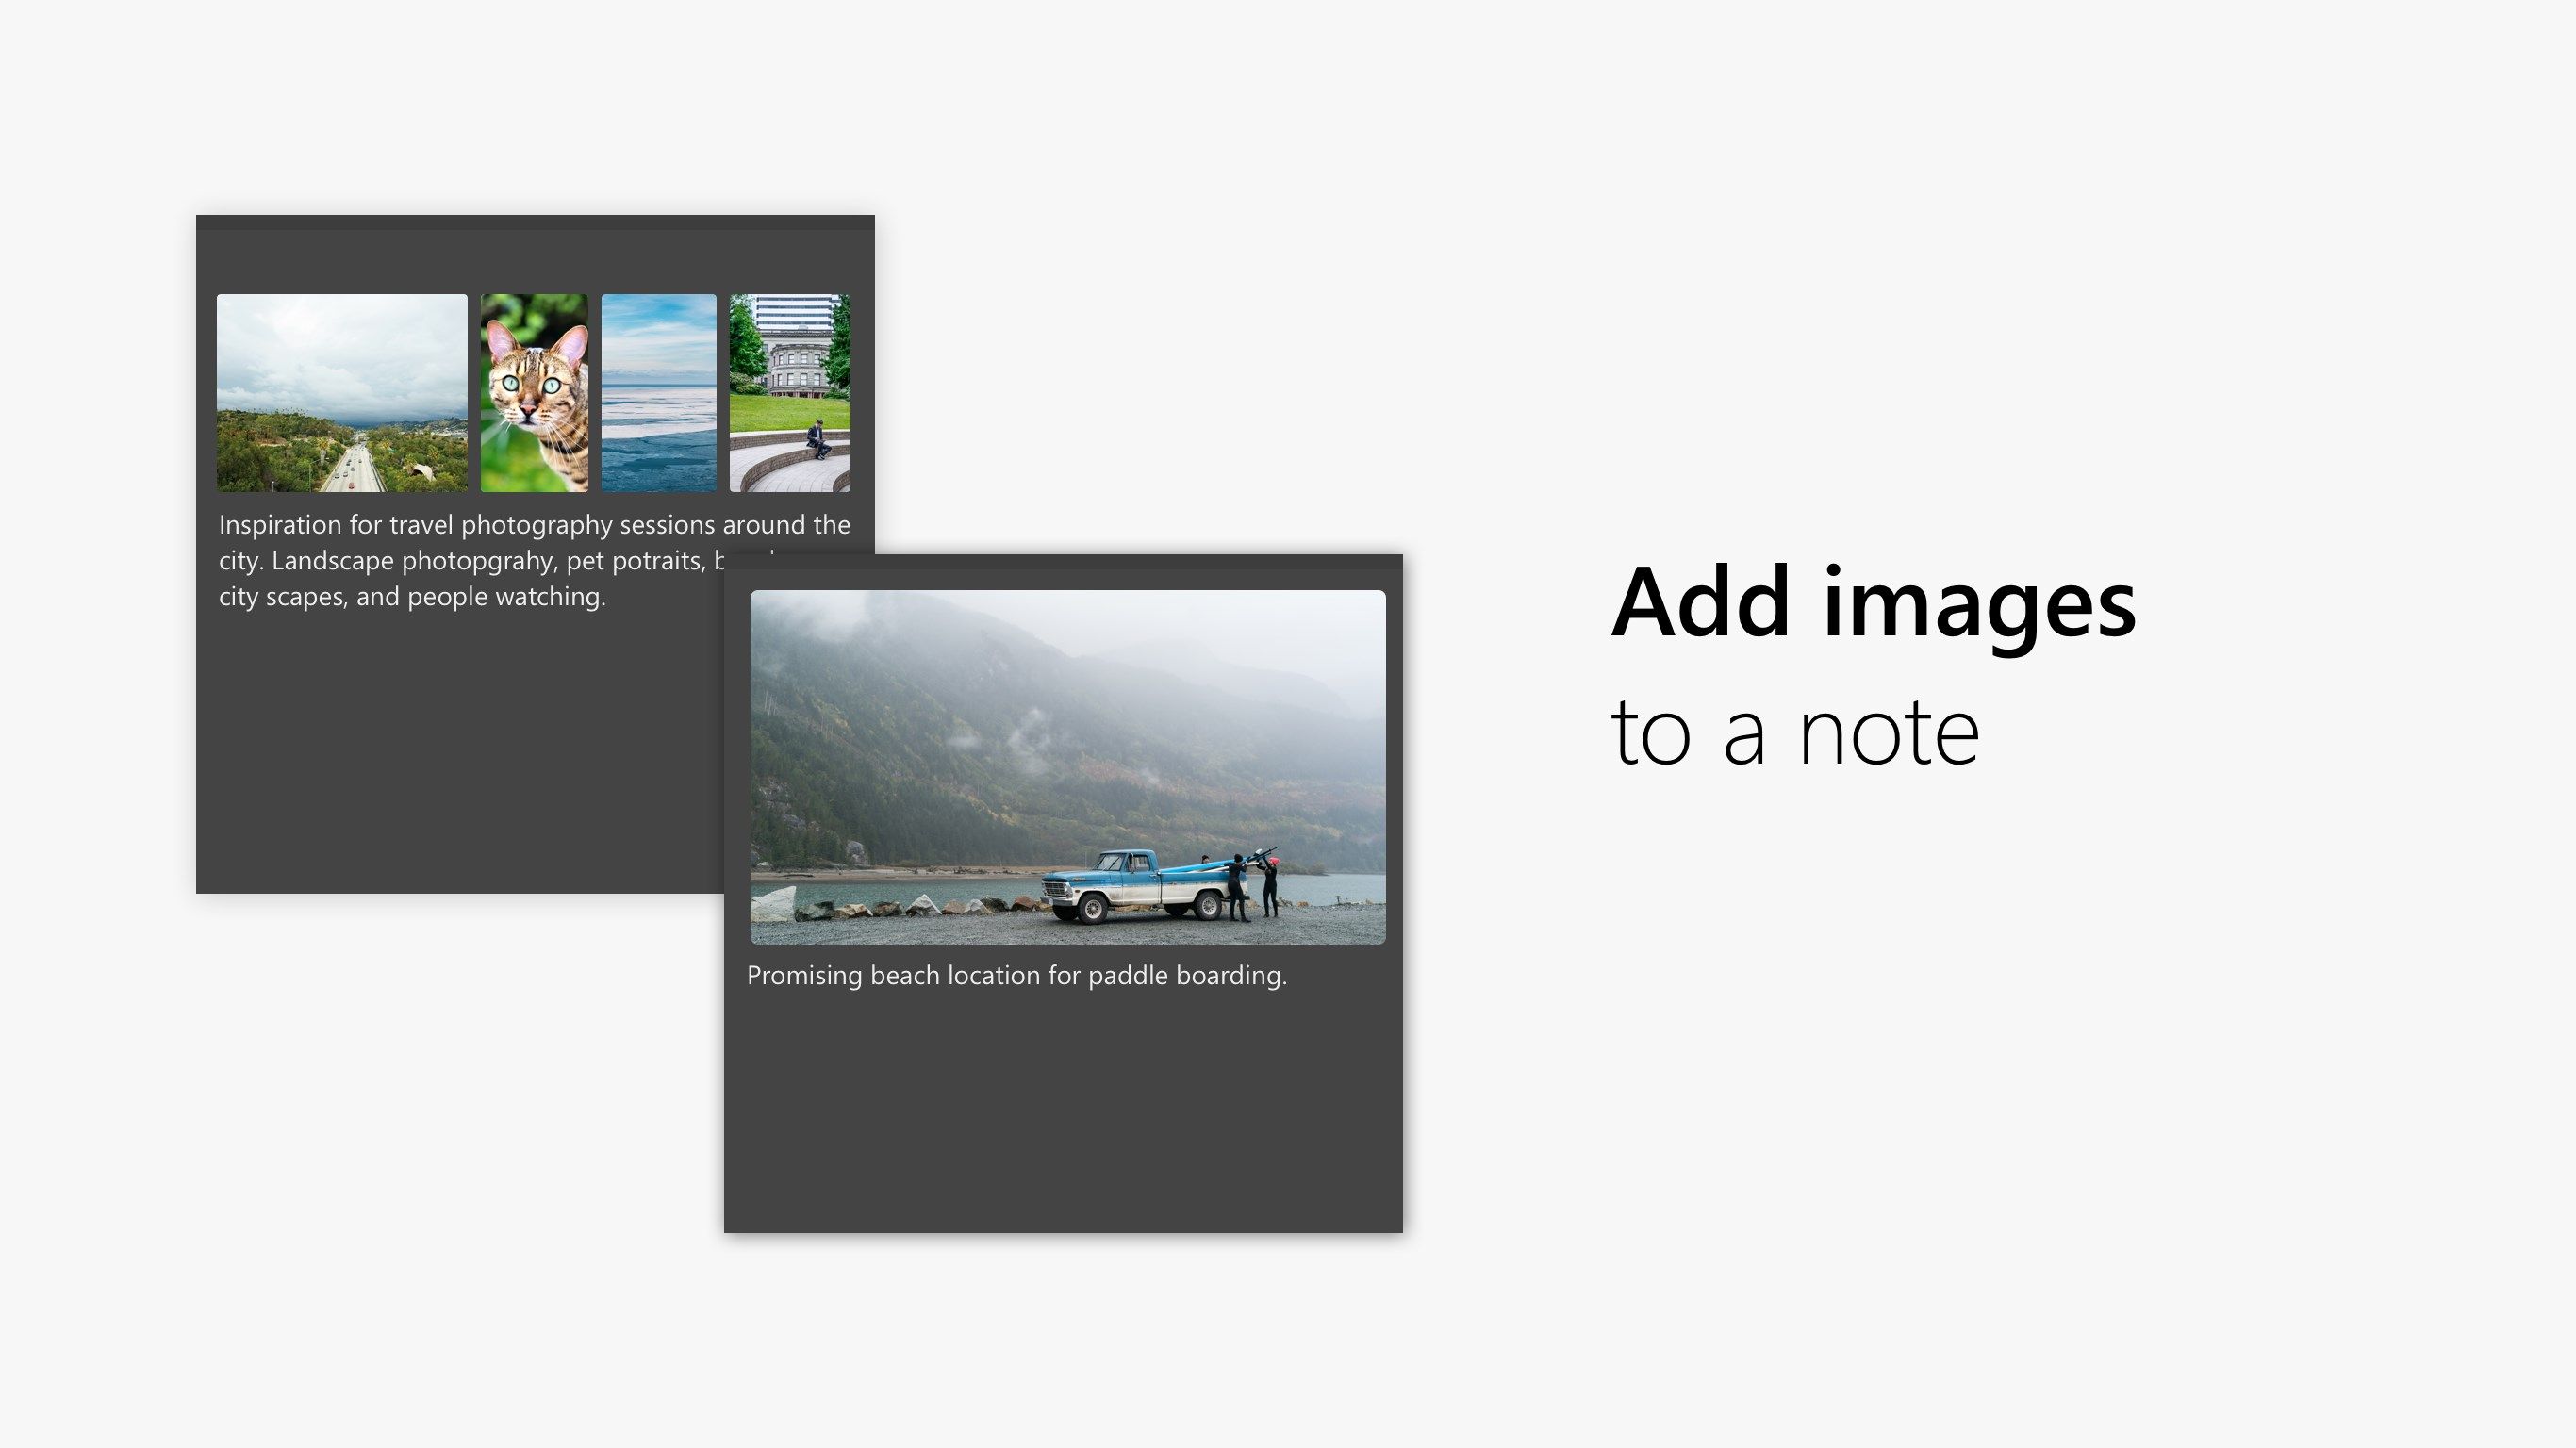 Add images to a note